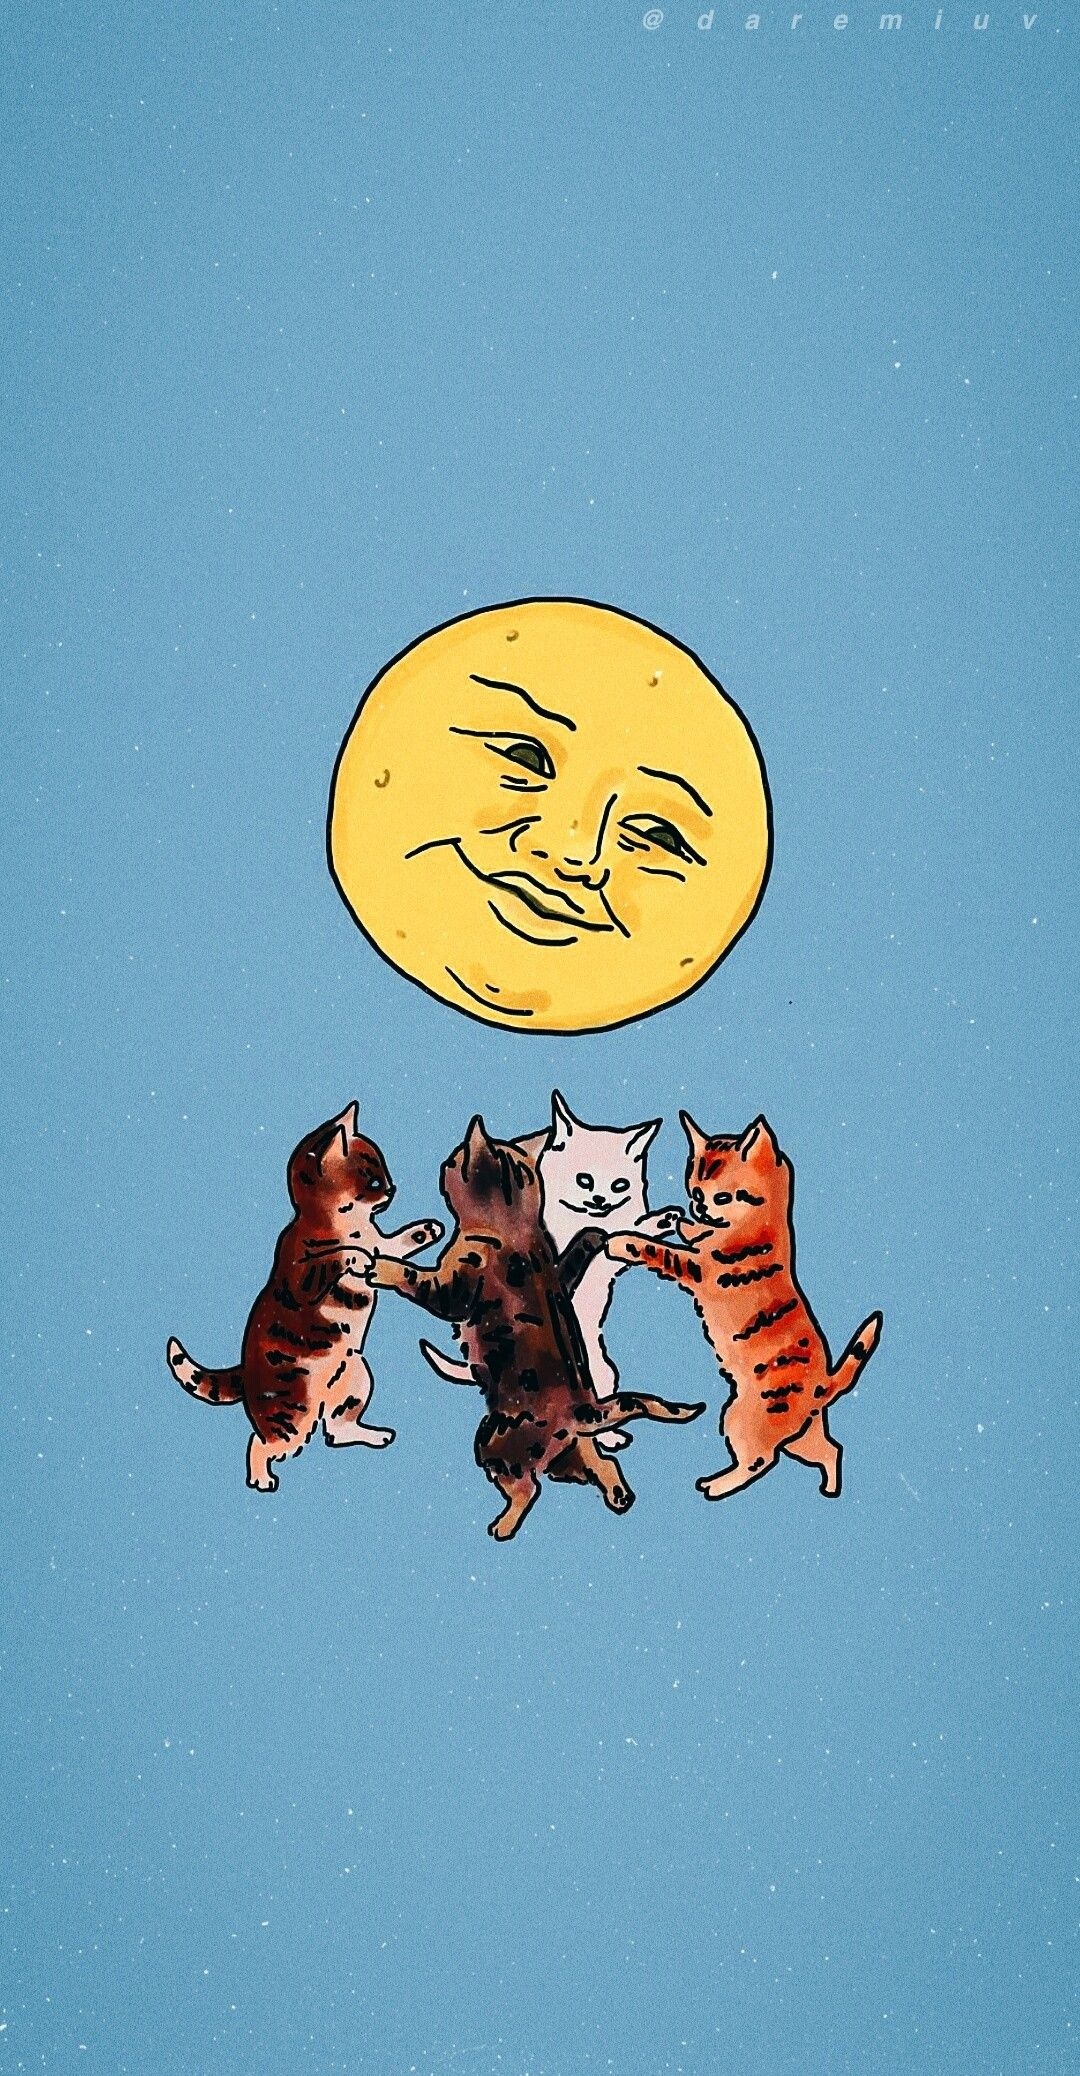 Sun and cats wallpaper, Whimsical art, Playful designs, Cute and colorful, 1080x2080 HD Phone